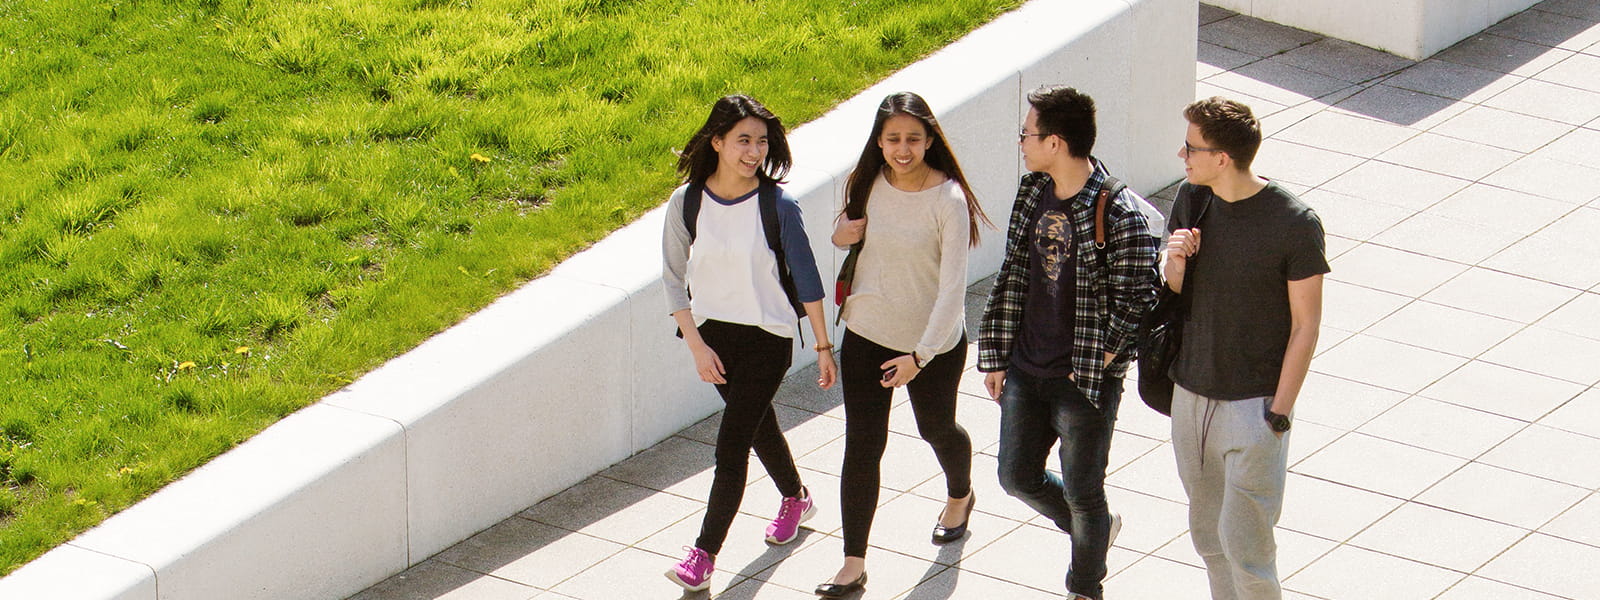 Students walking across the campus